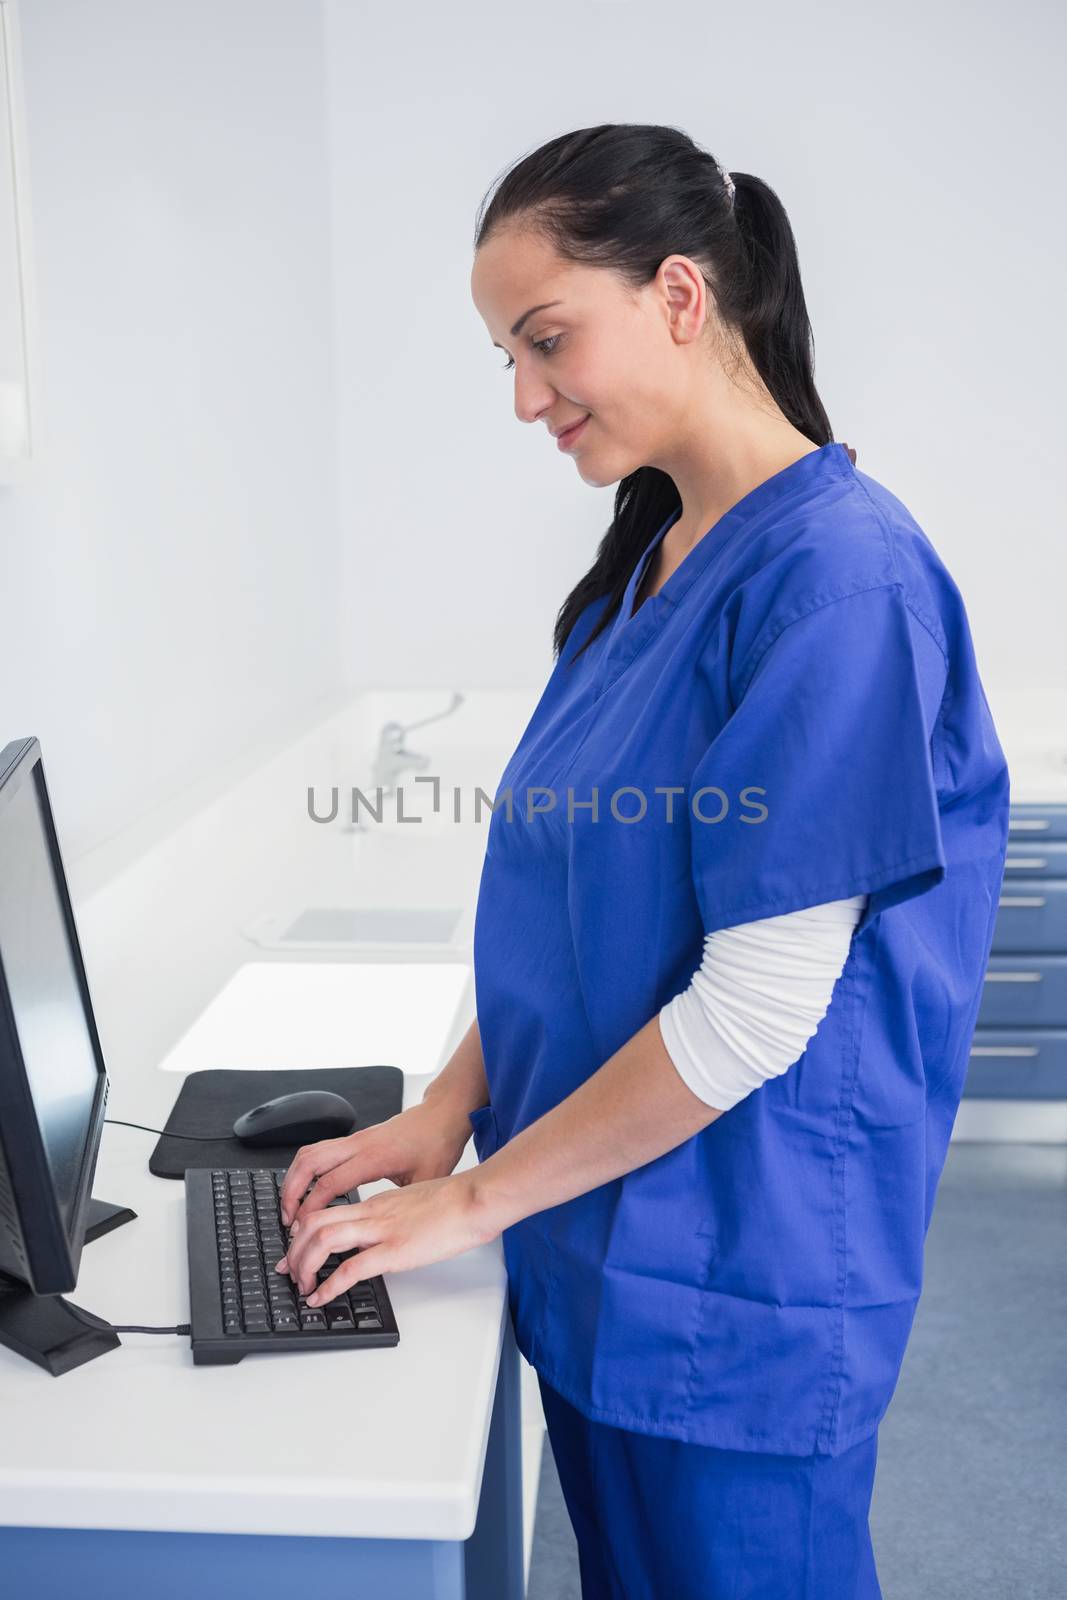 Smiling dentist typing on keyboard in dental clinic